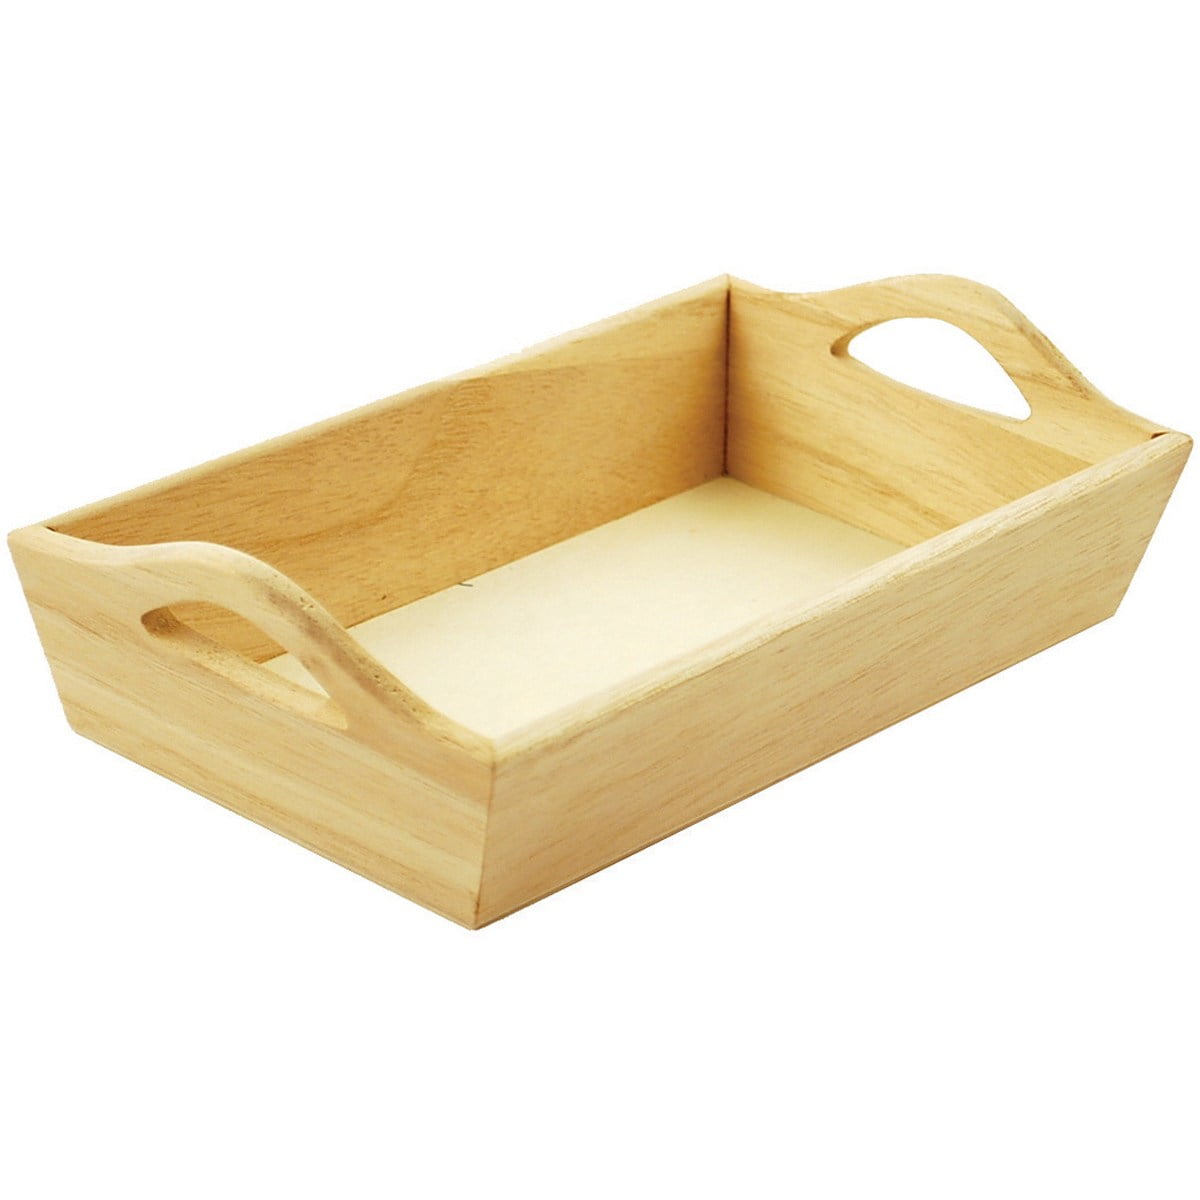 Multicraft Paintable Wooden Tray With, Painted Wooden Tray With Handles